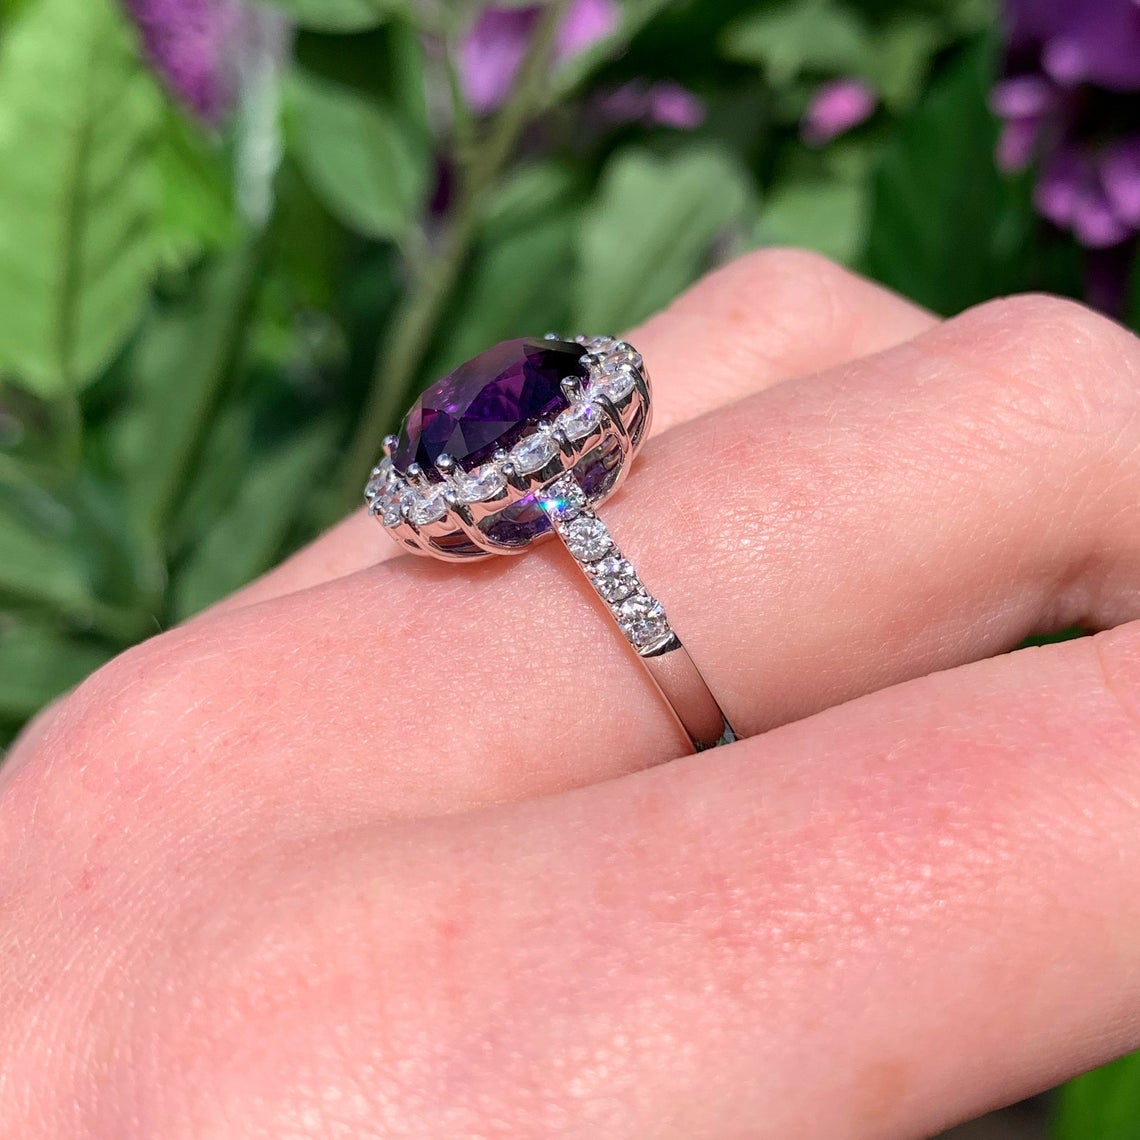 Spectacular 18ct White Gold Amethyst and Diamond Ring – SIZE N 1/2